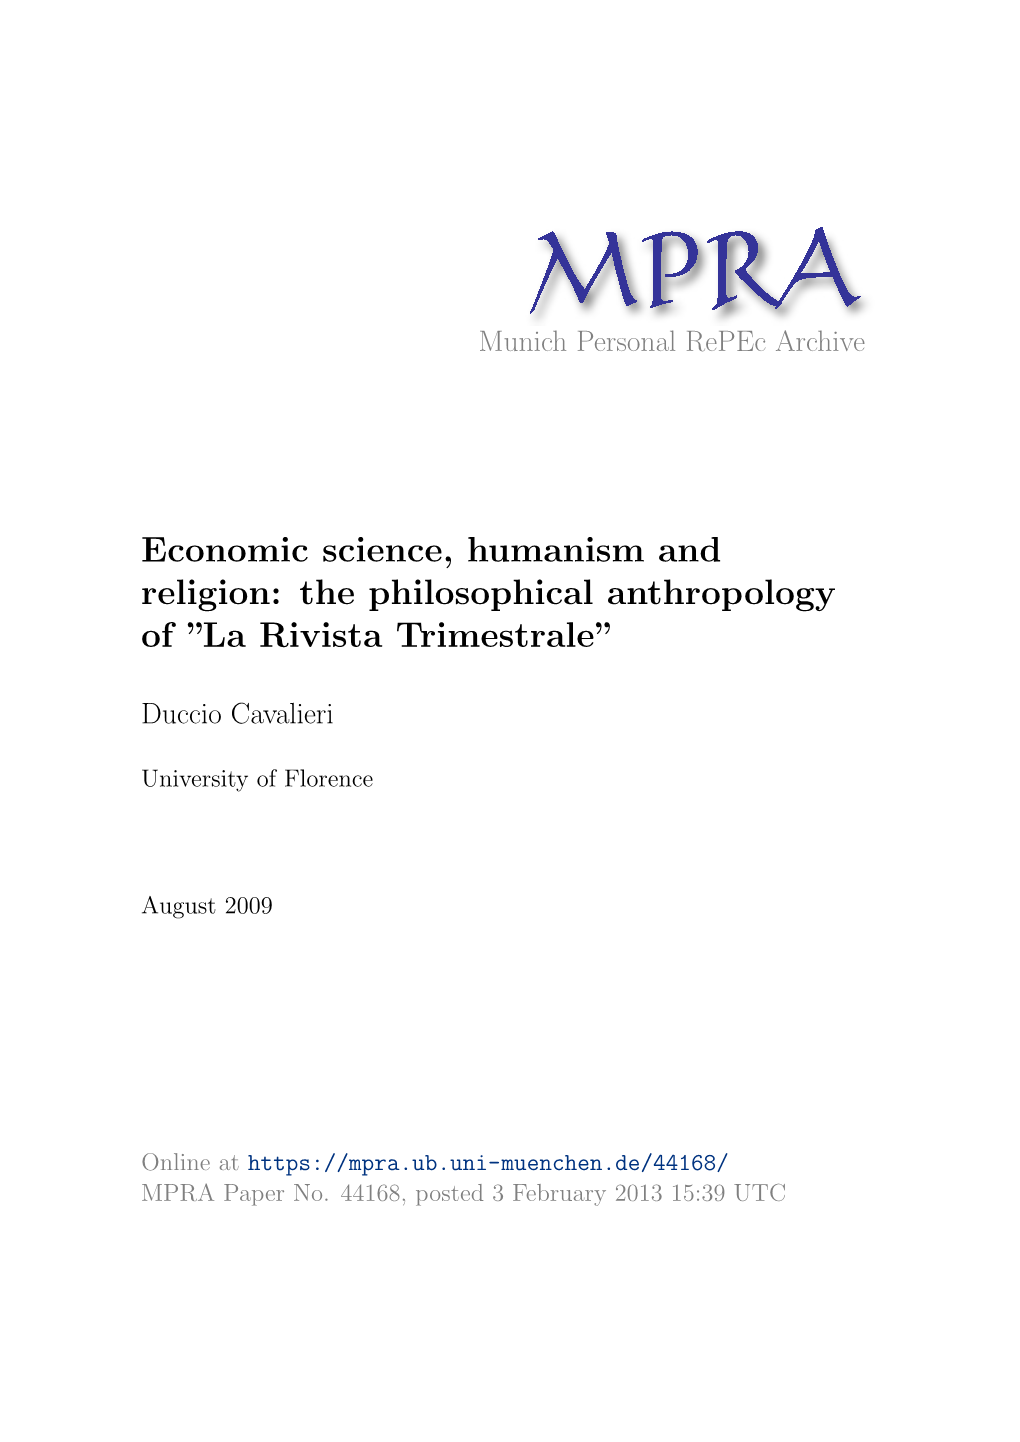 Economic Science, Humanism and Religion: the Philosophical Anthropology of ”La Rivista Trimestrale”